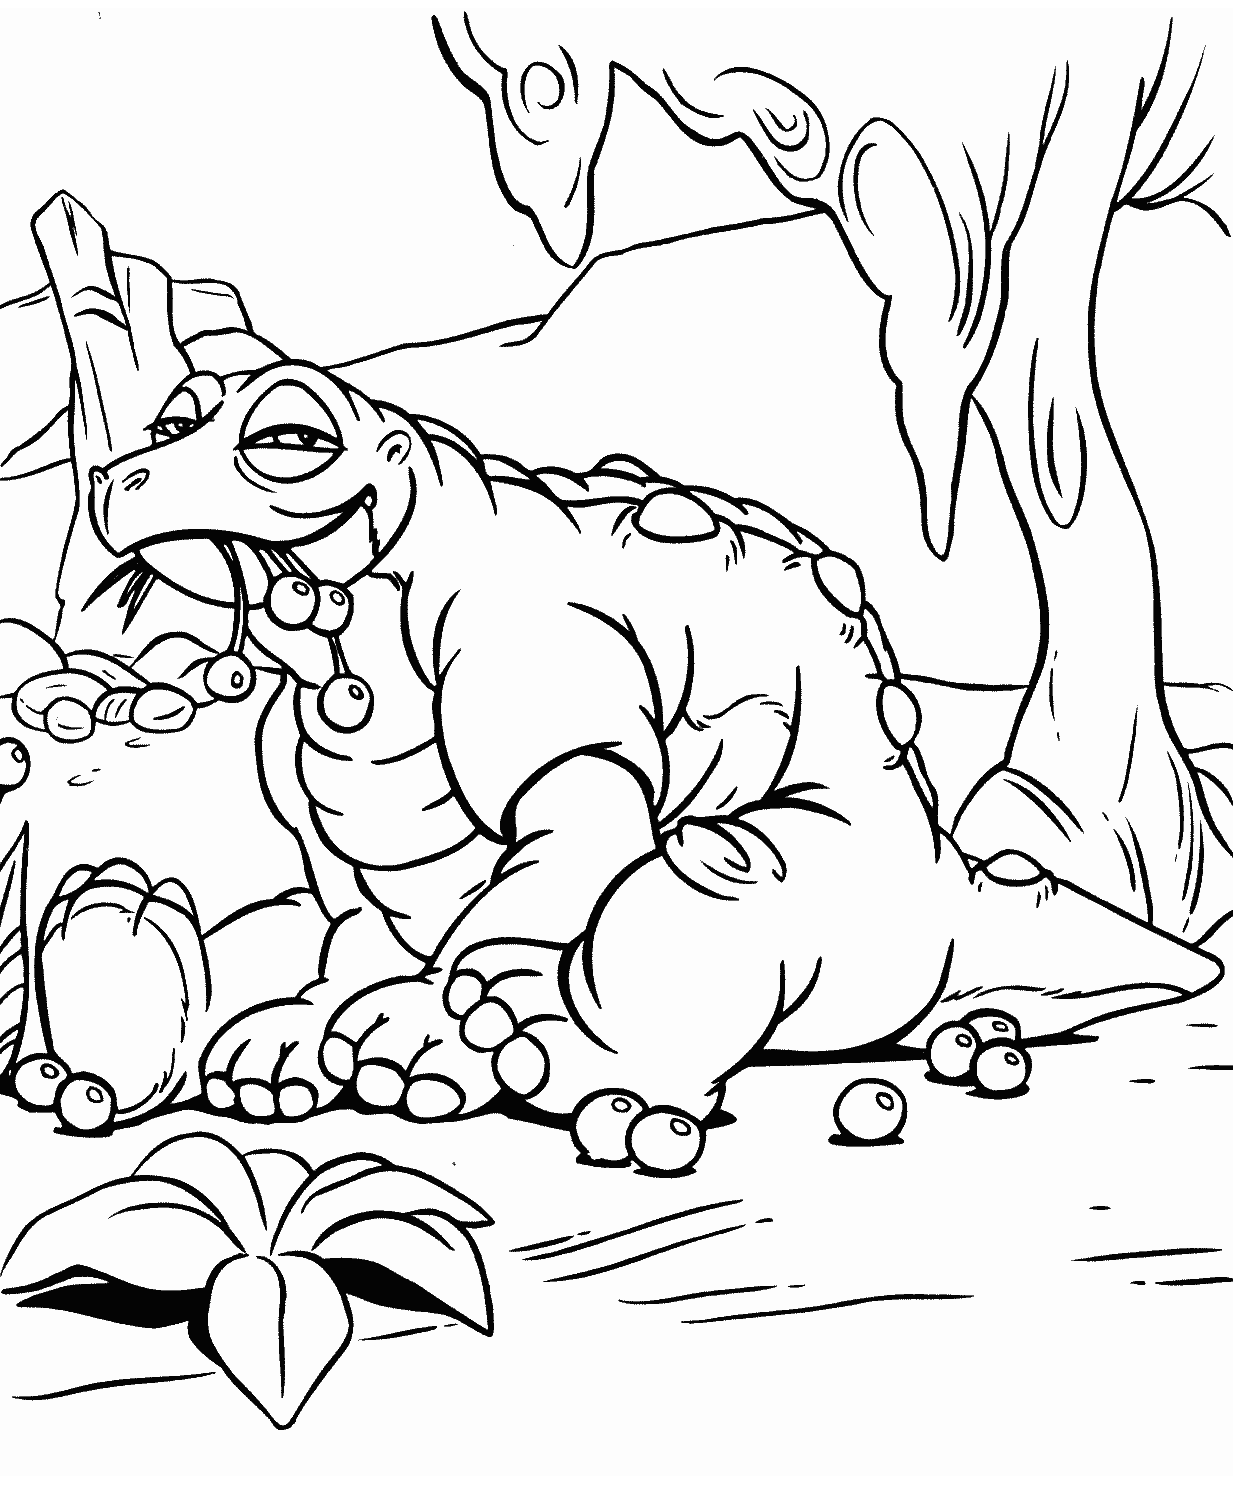 Dinosaurs Coloring Pages for boys lf7 Printable 2020 0322 Coloring4free